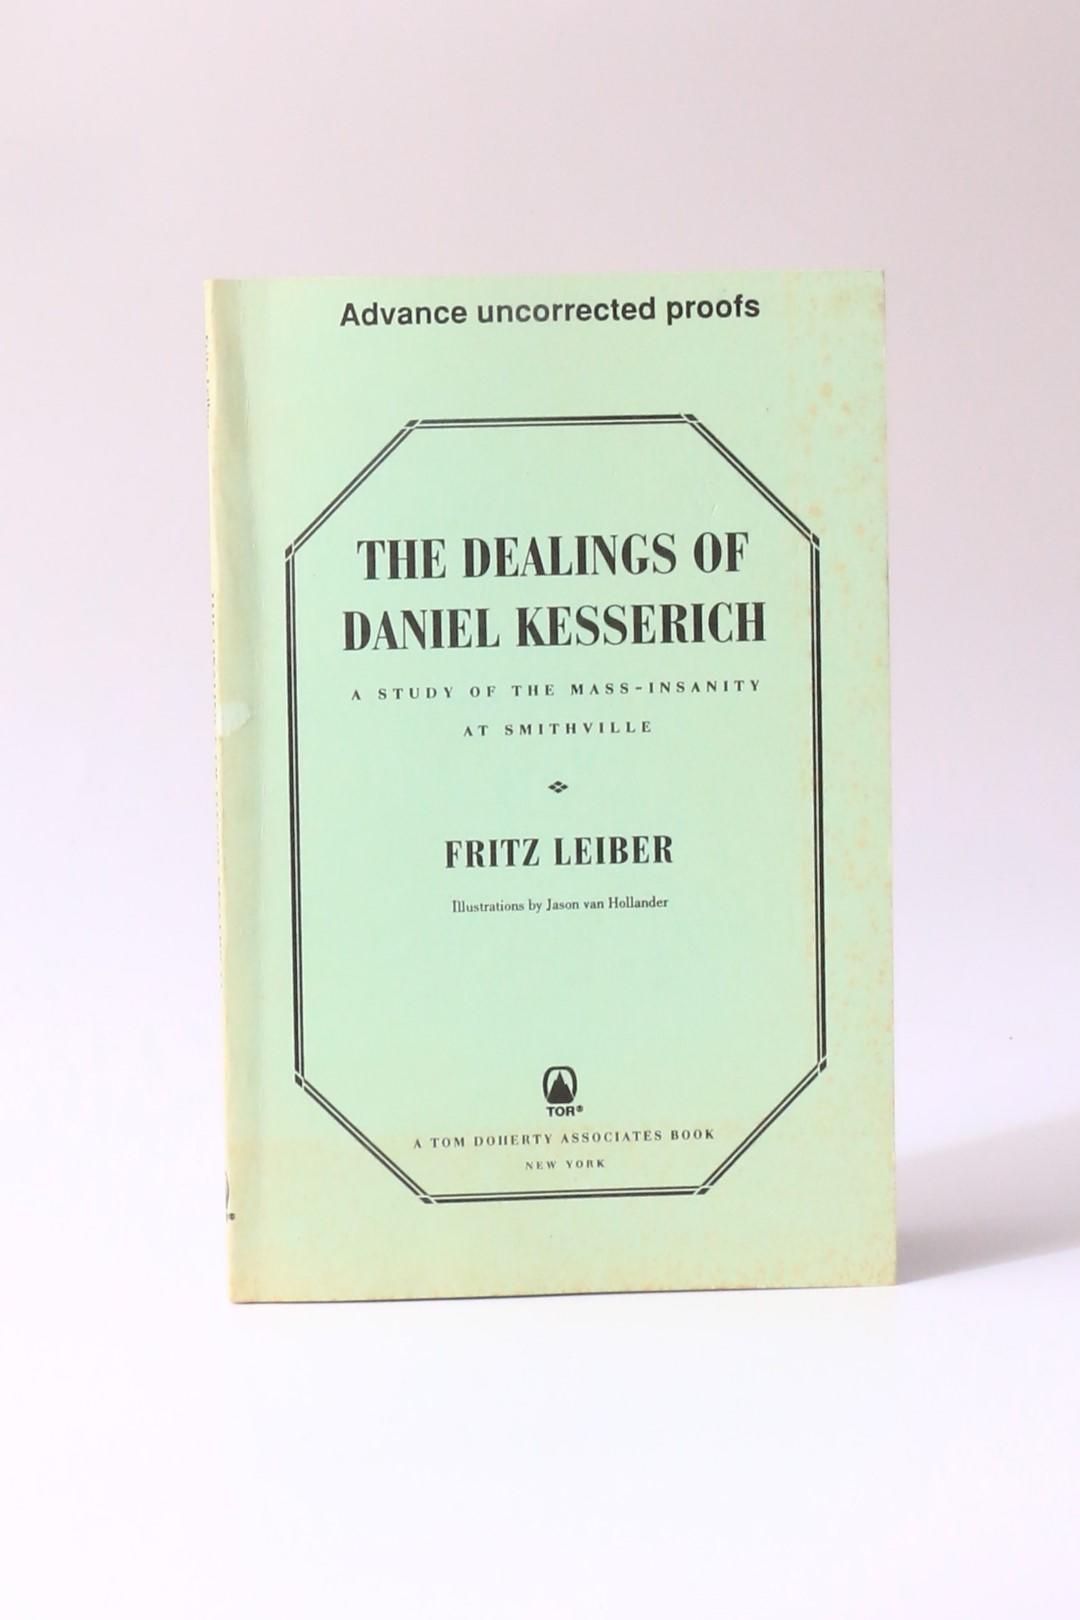 Fritz Leiber - The Dealings of Daniel Kesserich: A Stody of the Mass-Insanity at Smithville - Tor, 1997, Proof.